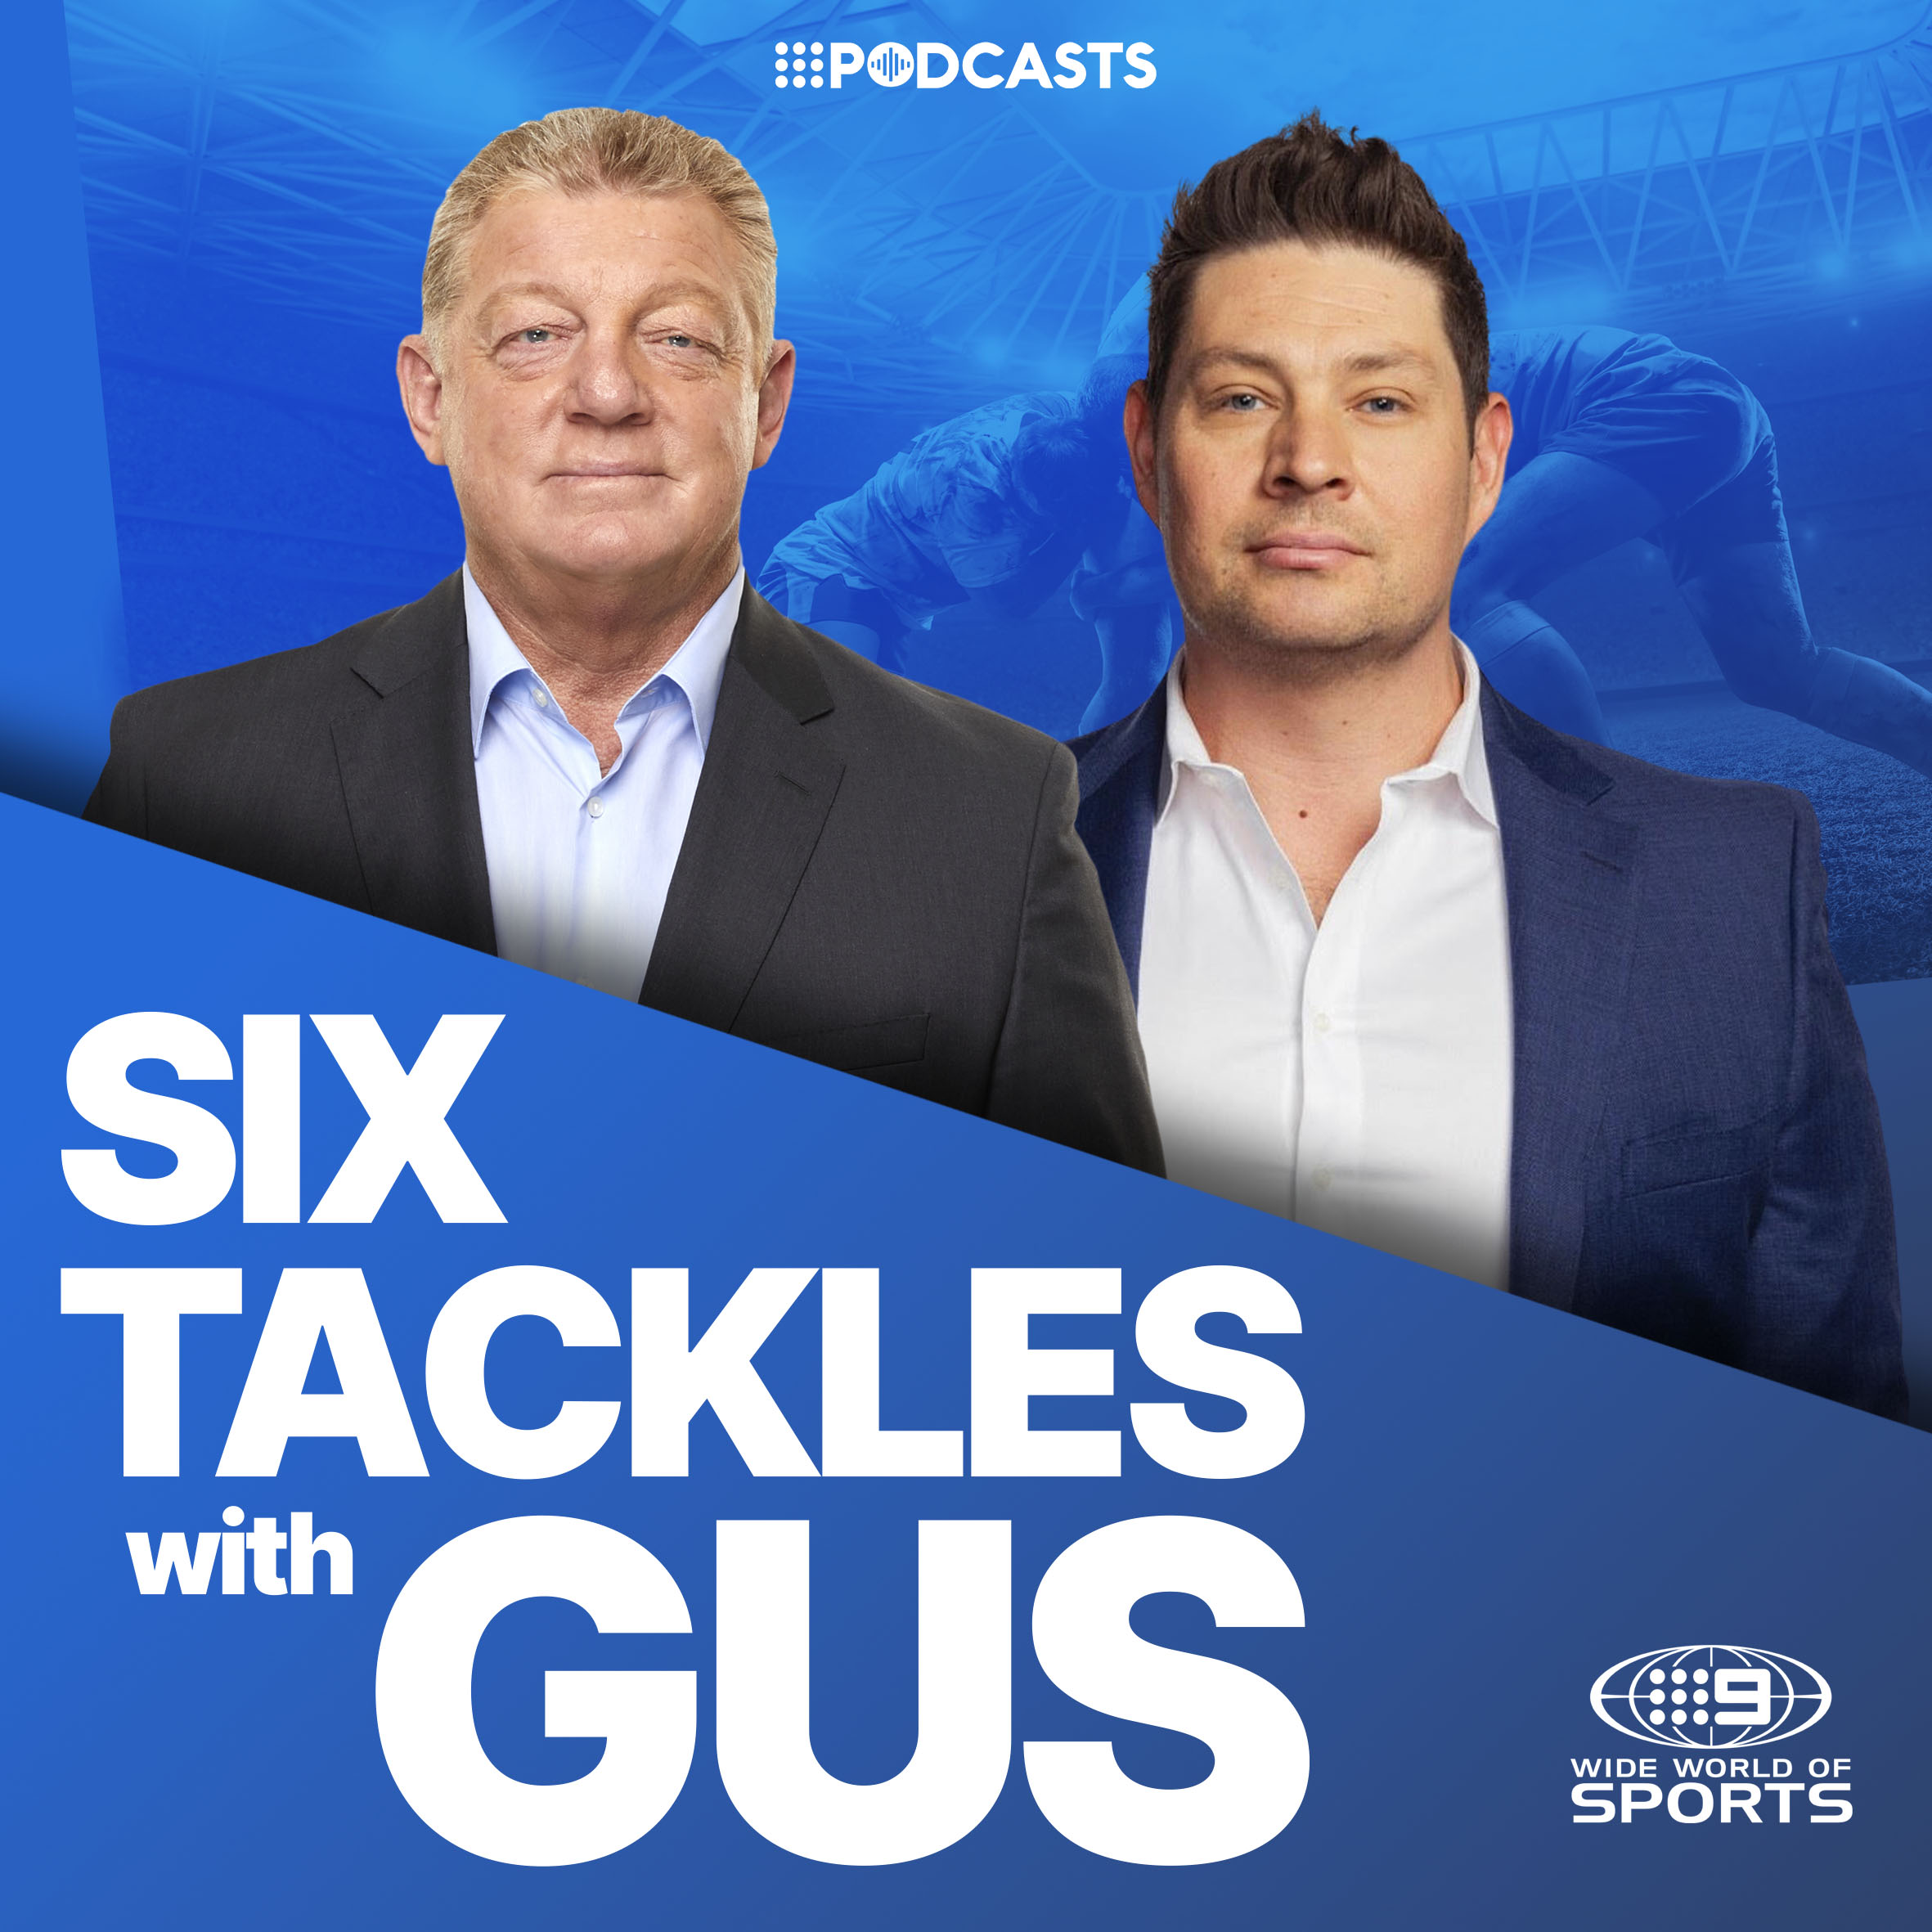 Six Tackles Returns: Gus is Ready to Rumble from Feb 21!